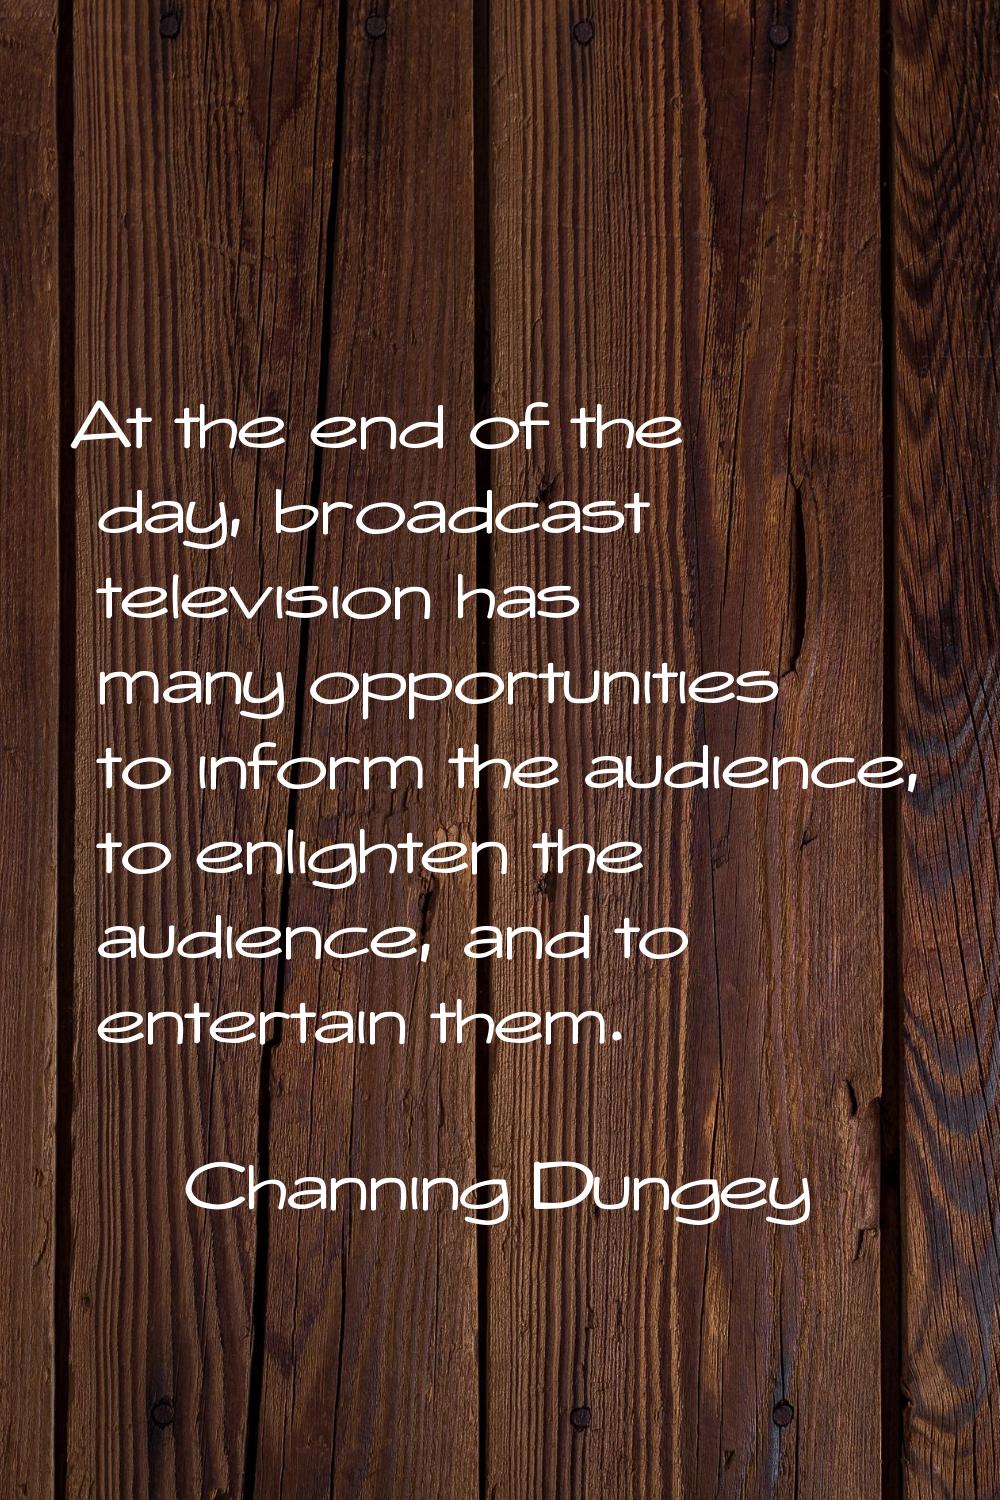 At the end of the day, broadcast television has many opportunities to inform the audience, to enlig